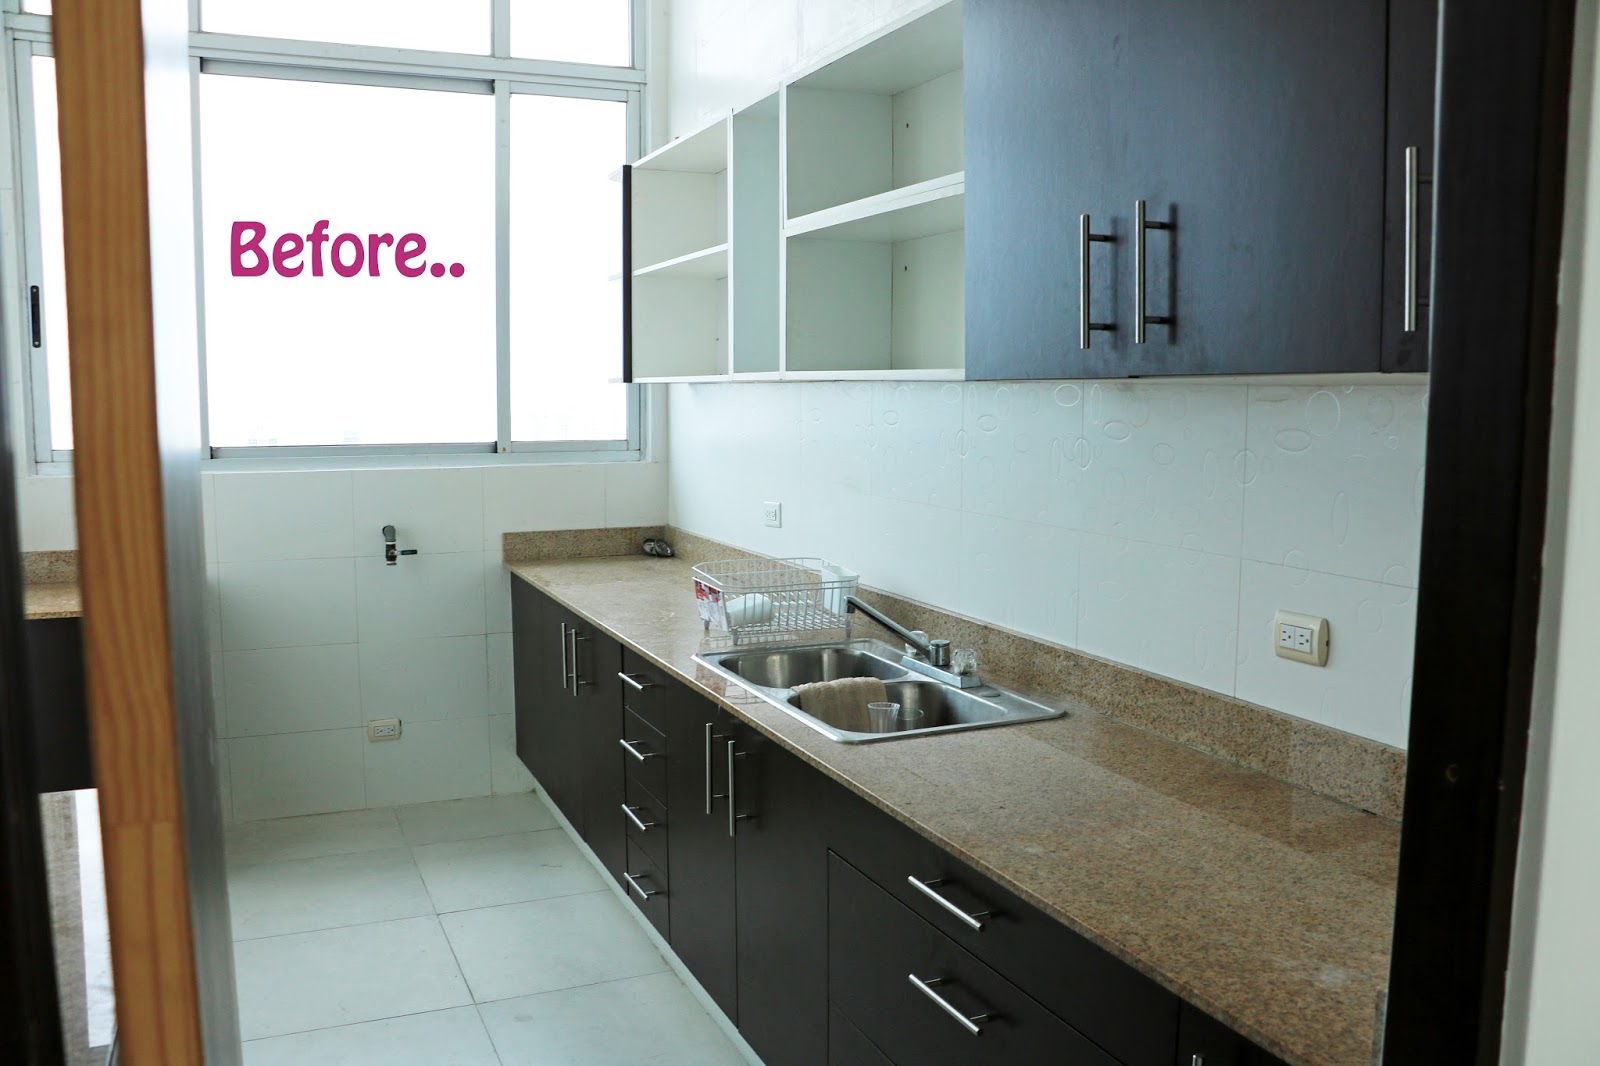 Click through to see the full makeover of this kitchen!